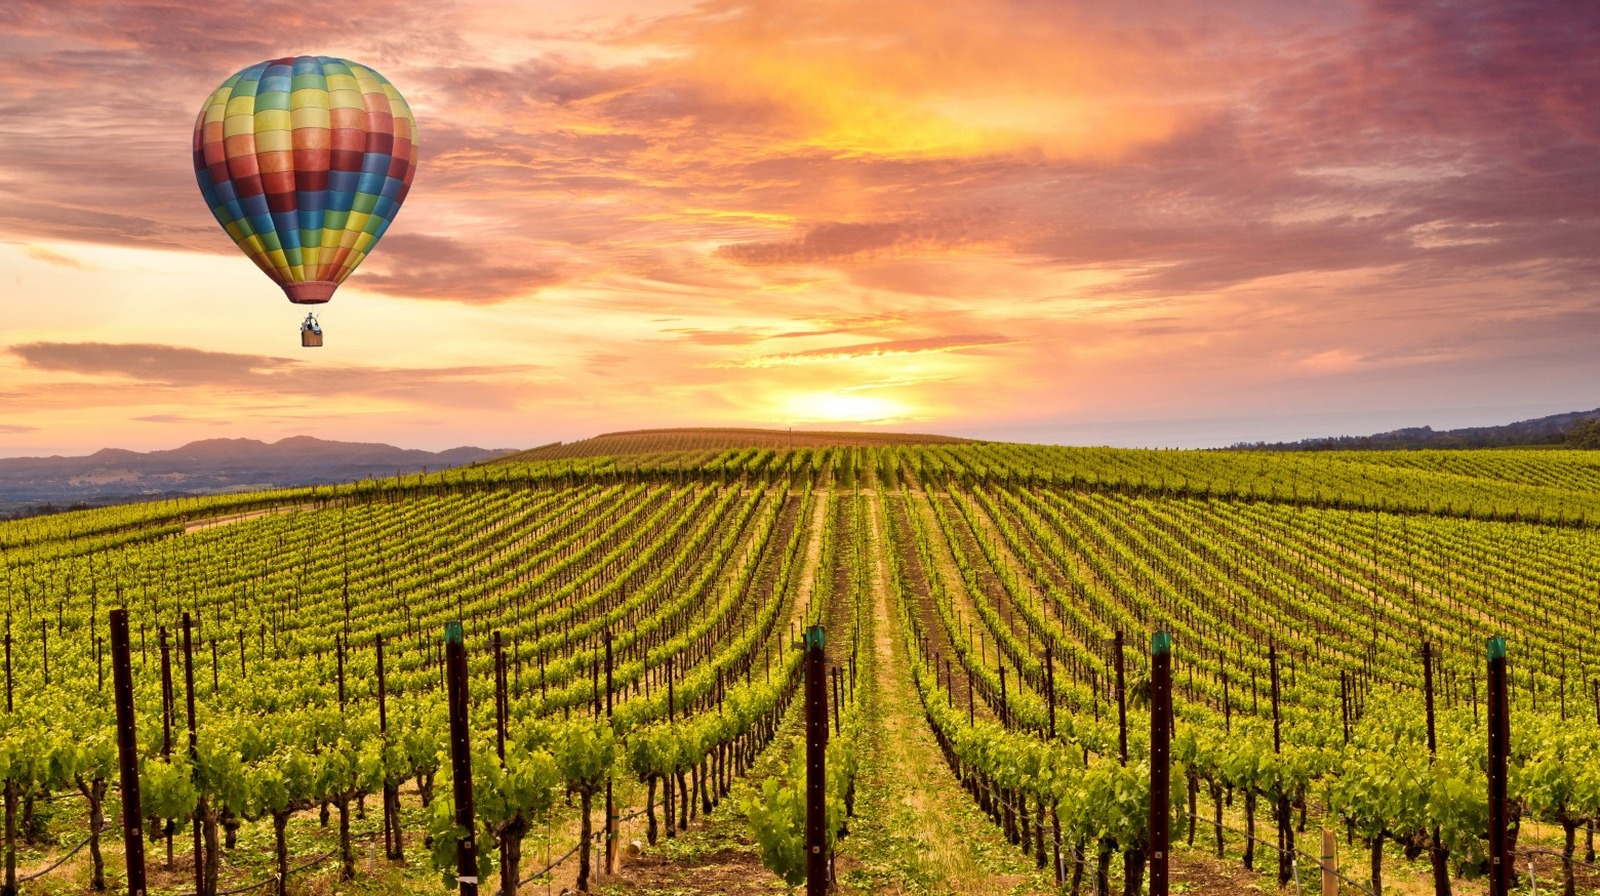 The most photographed places in Napa Valley - The Visit Napa